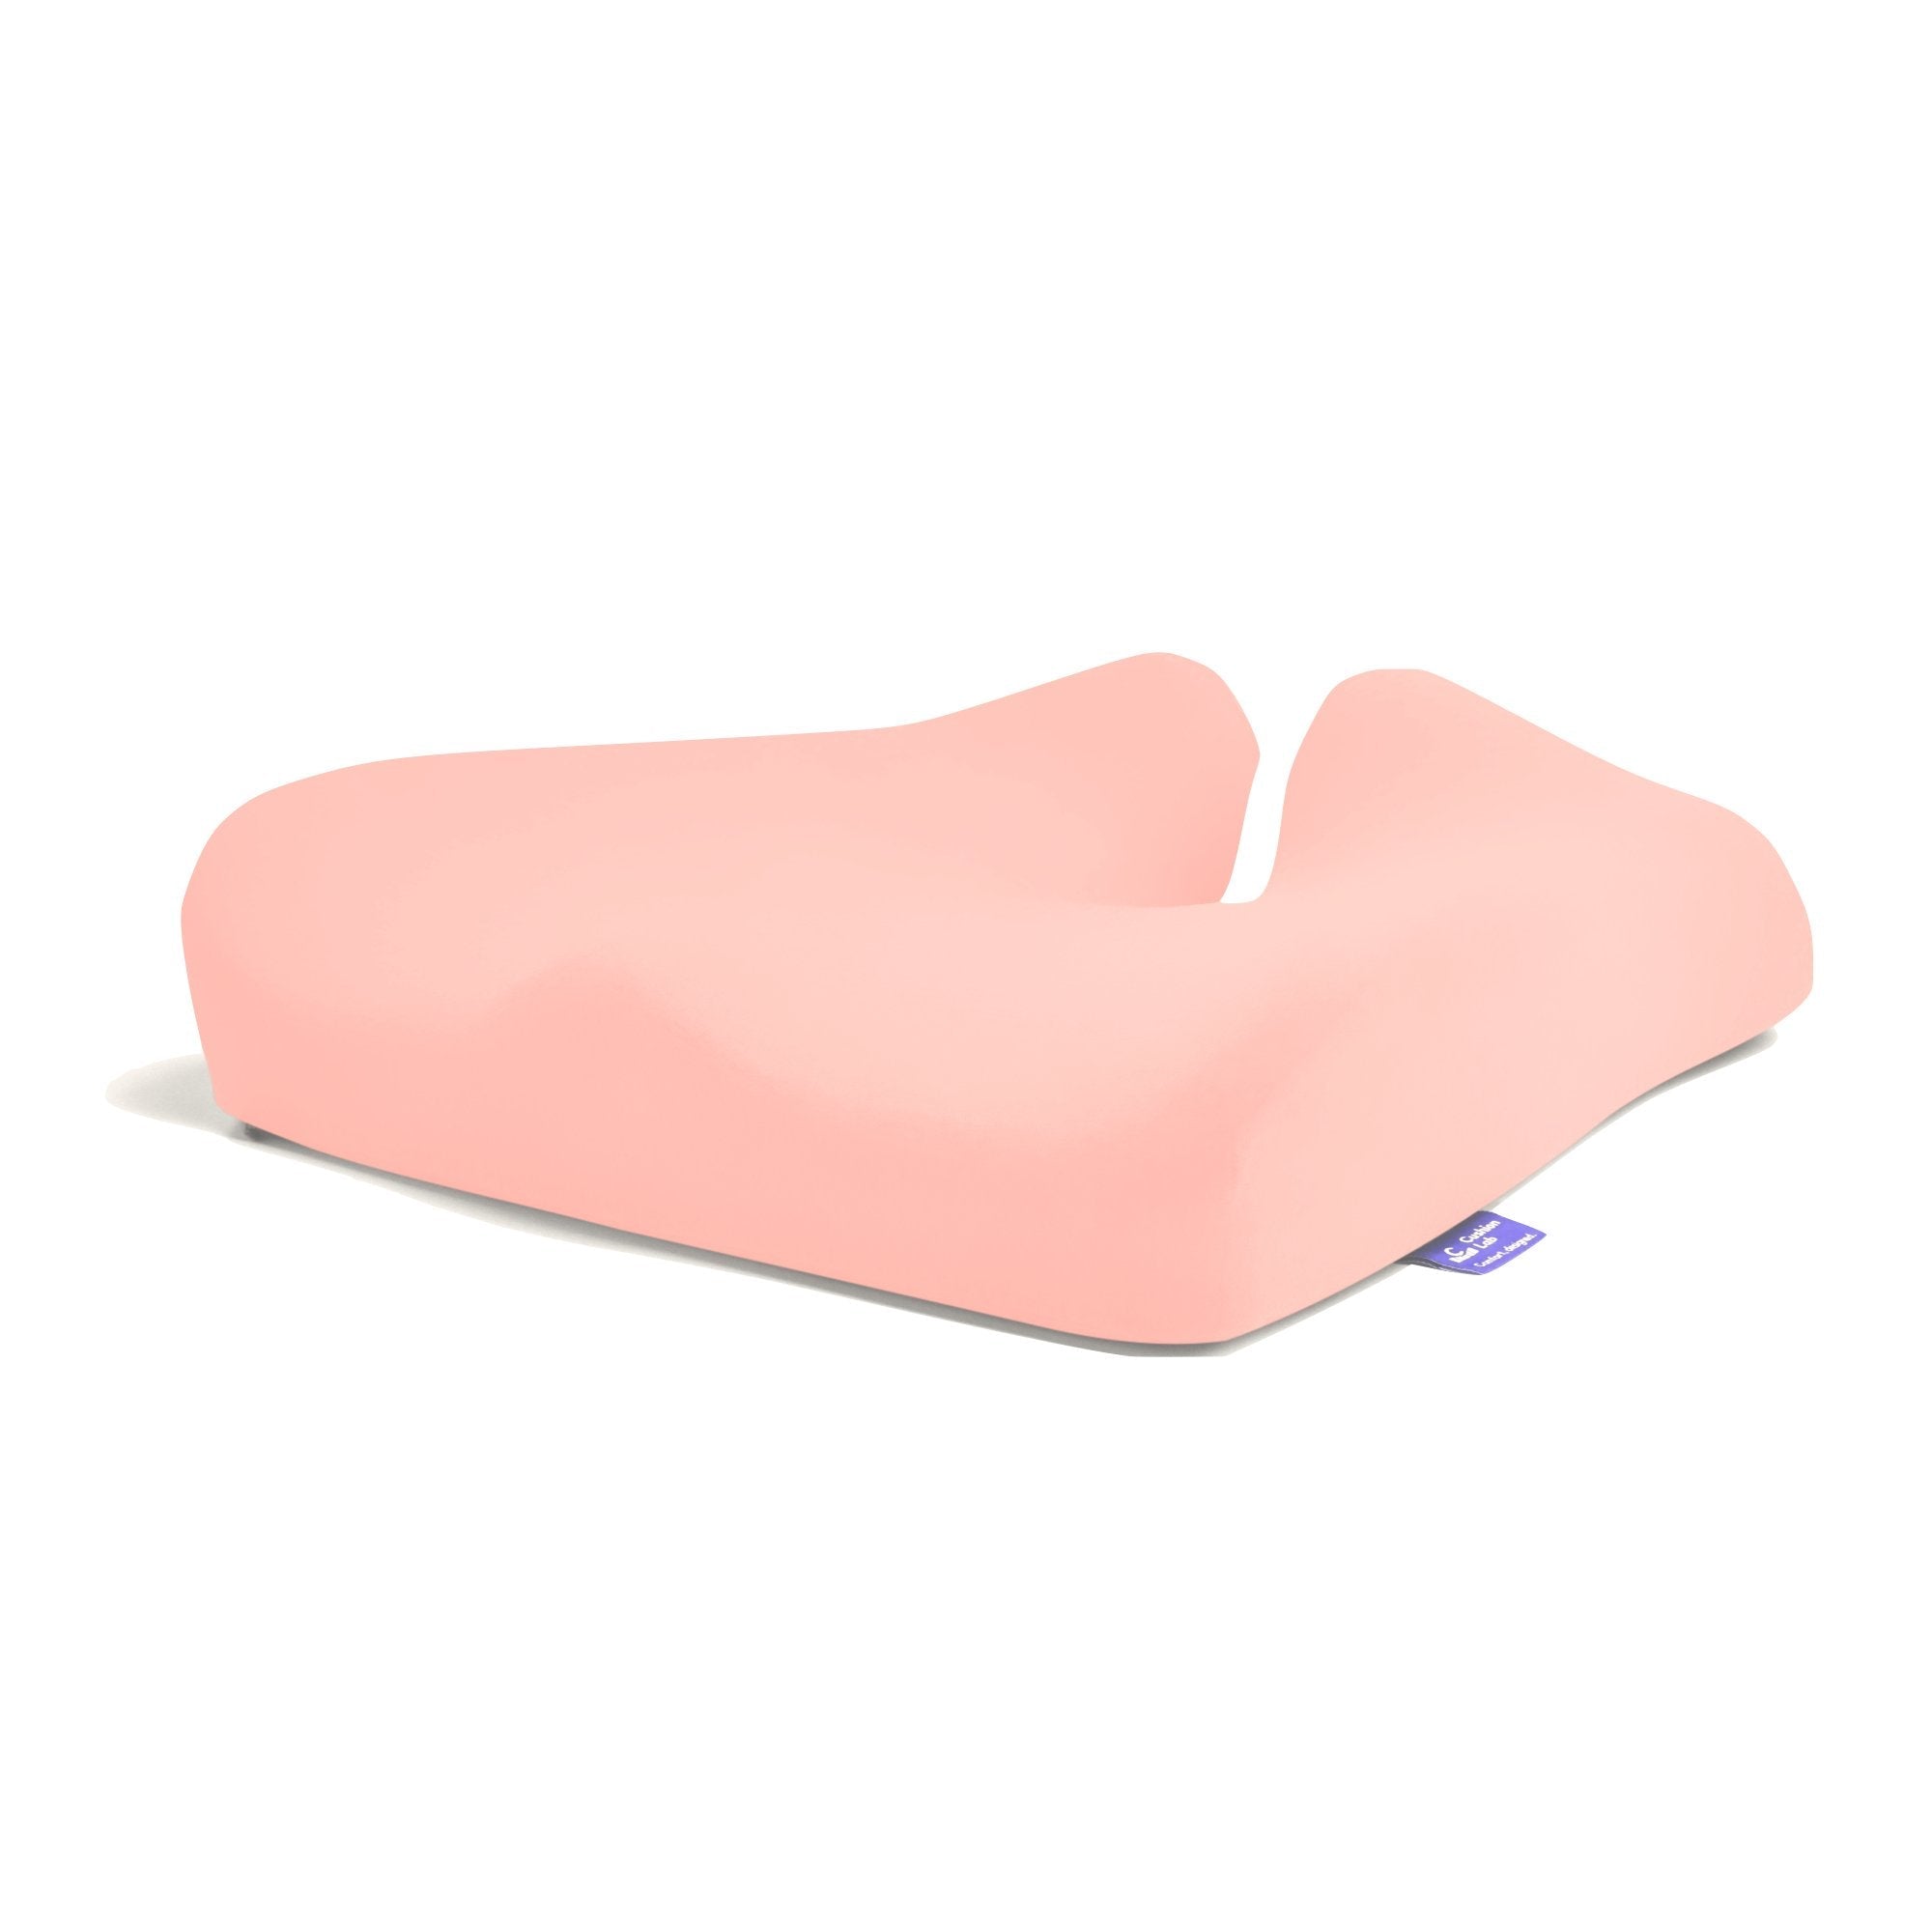  Cushion Lab Seat Cushion Pressure Relief and Lower